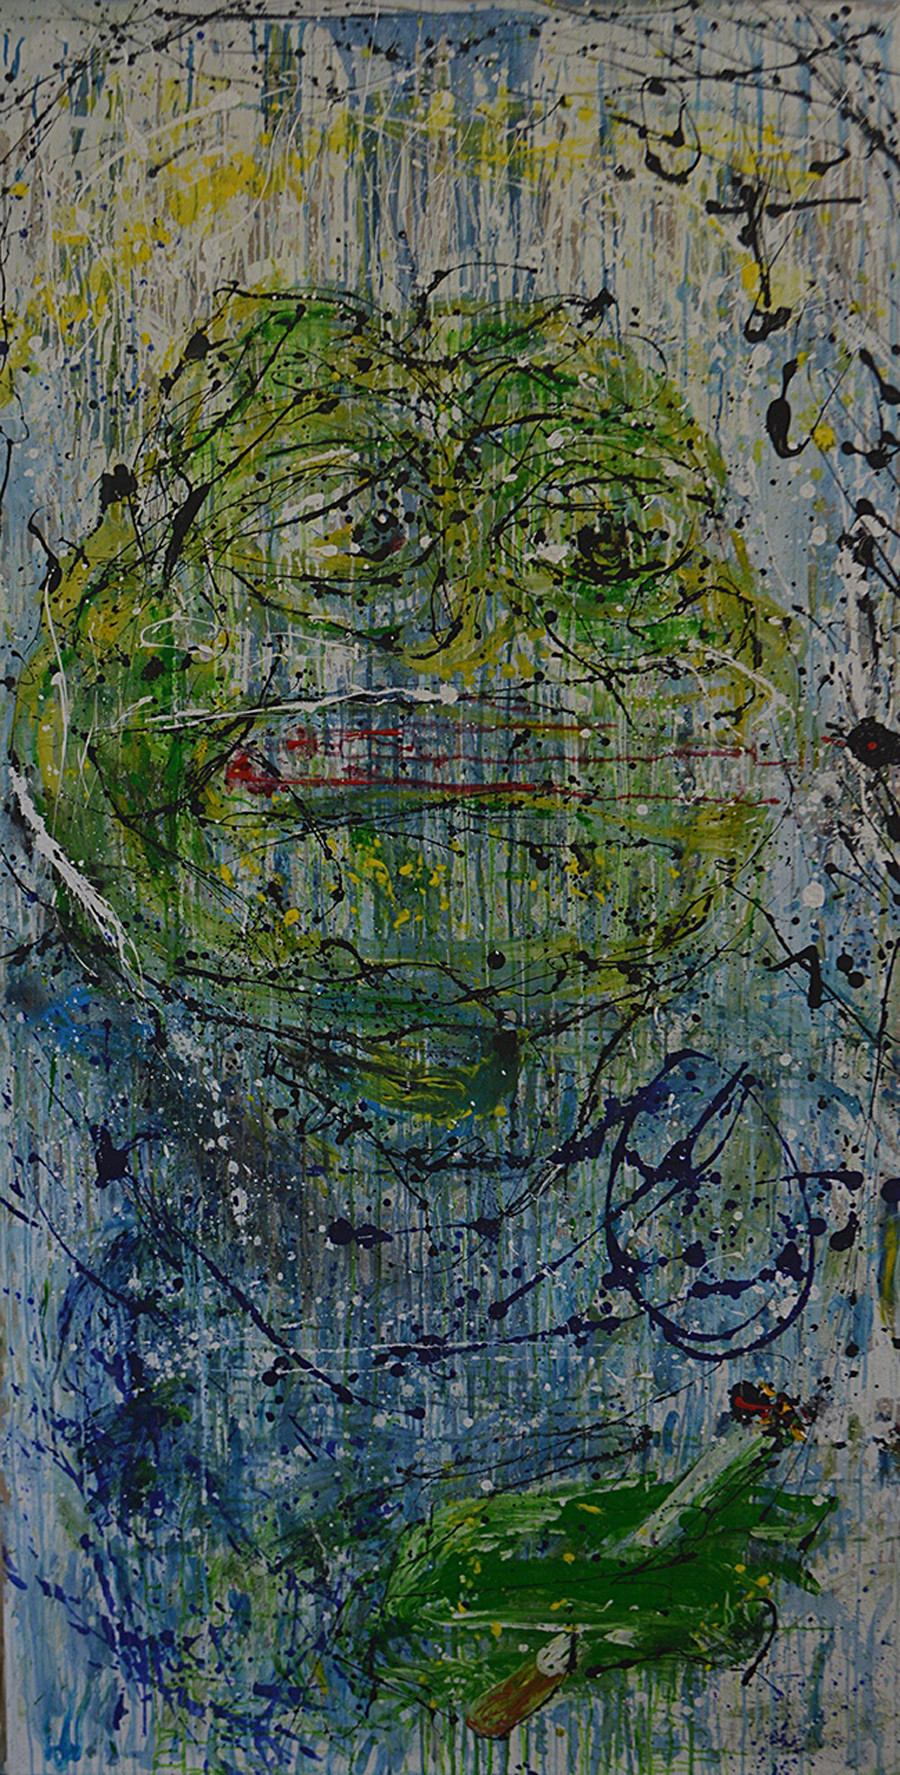 Pepe Pollock (based on several works by Jackson Pollock).